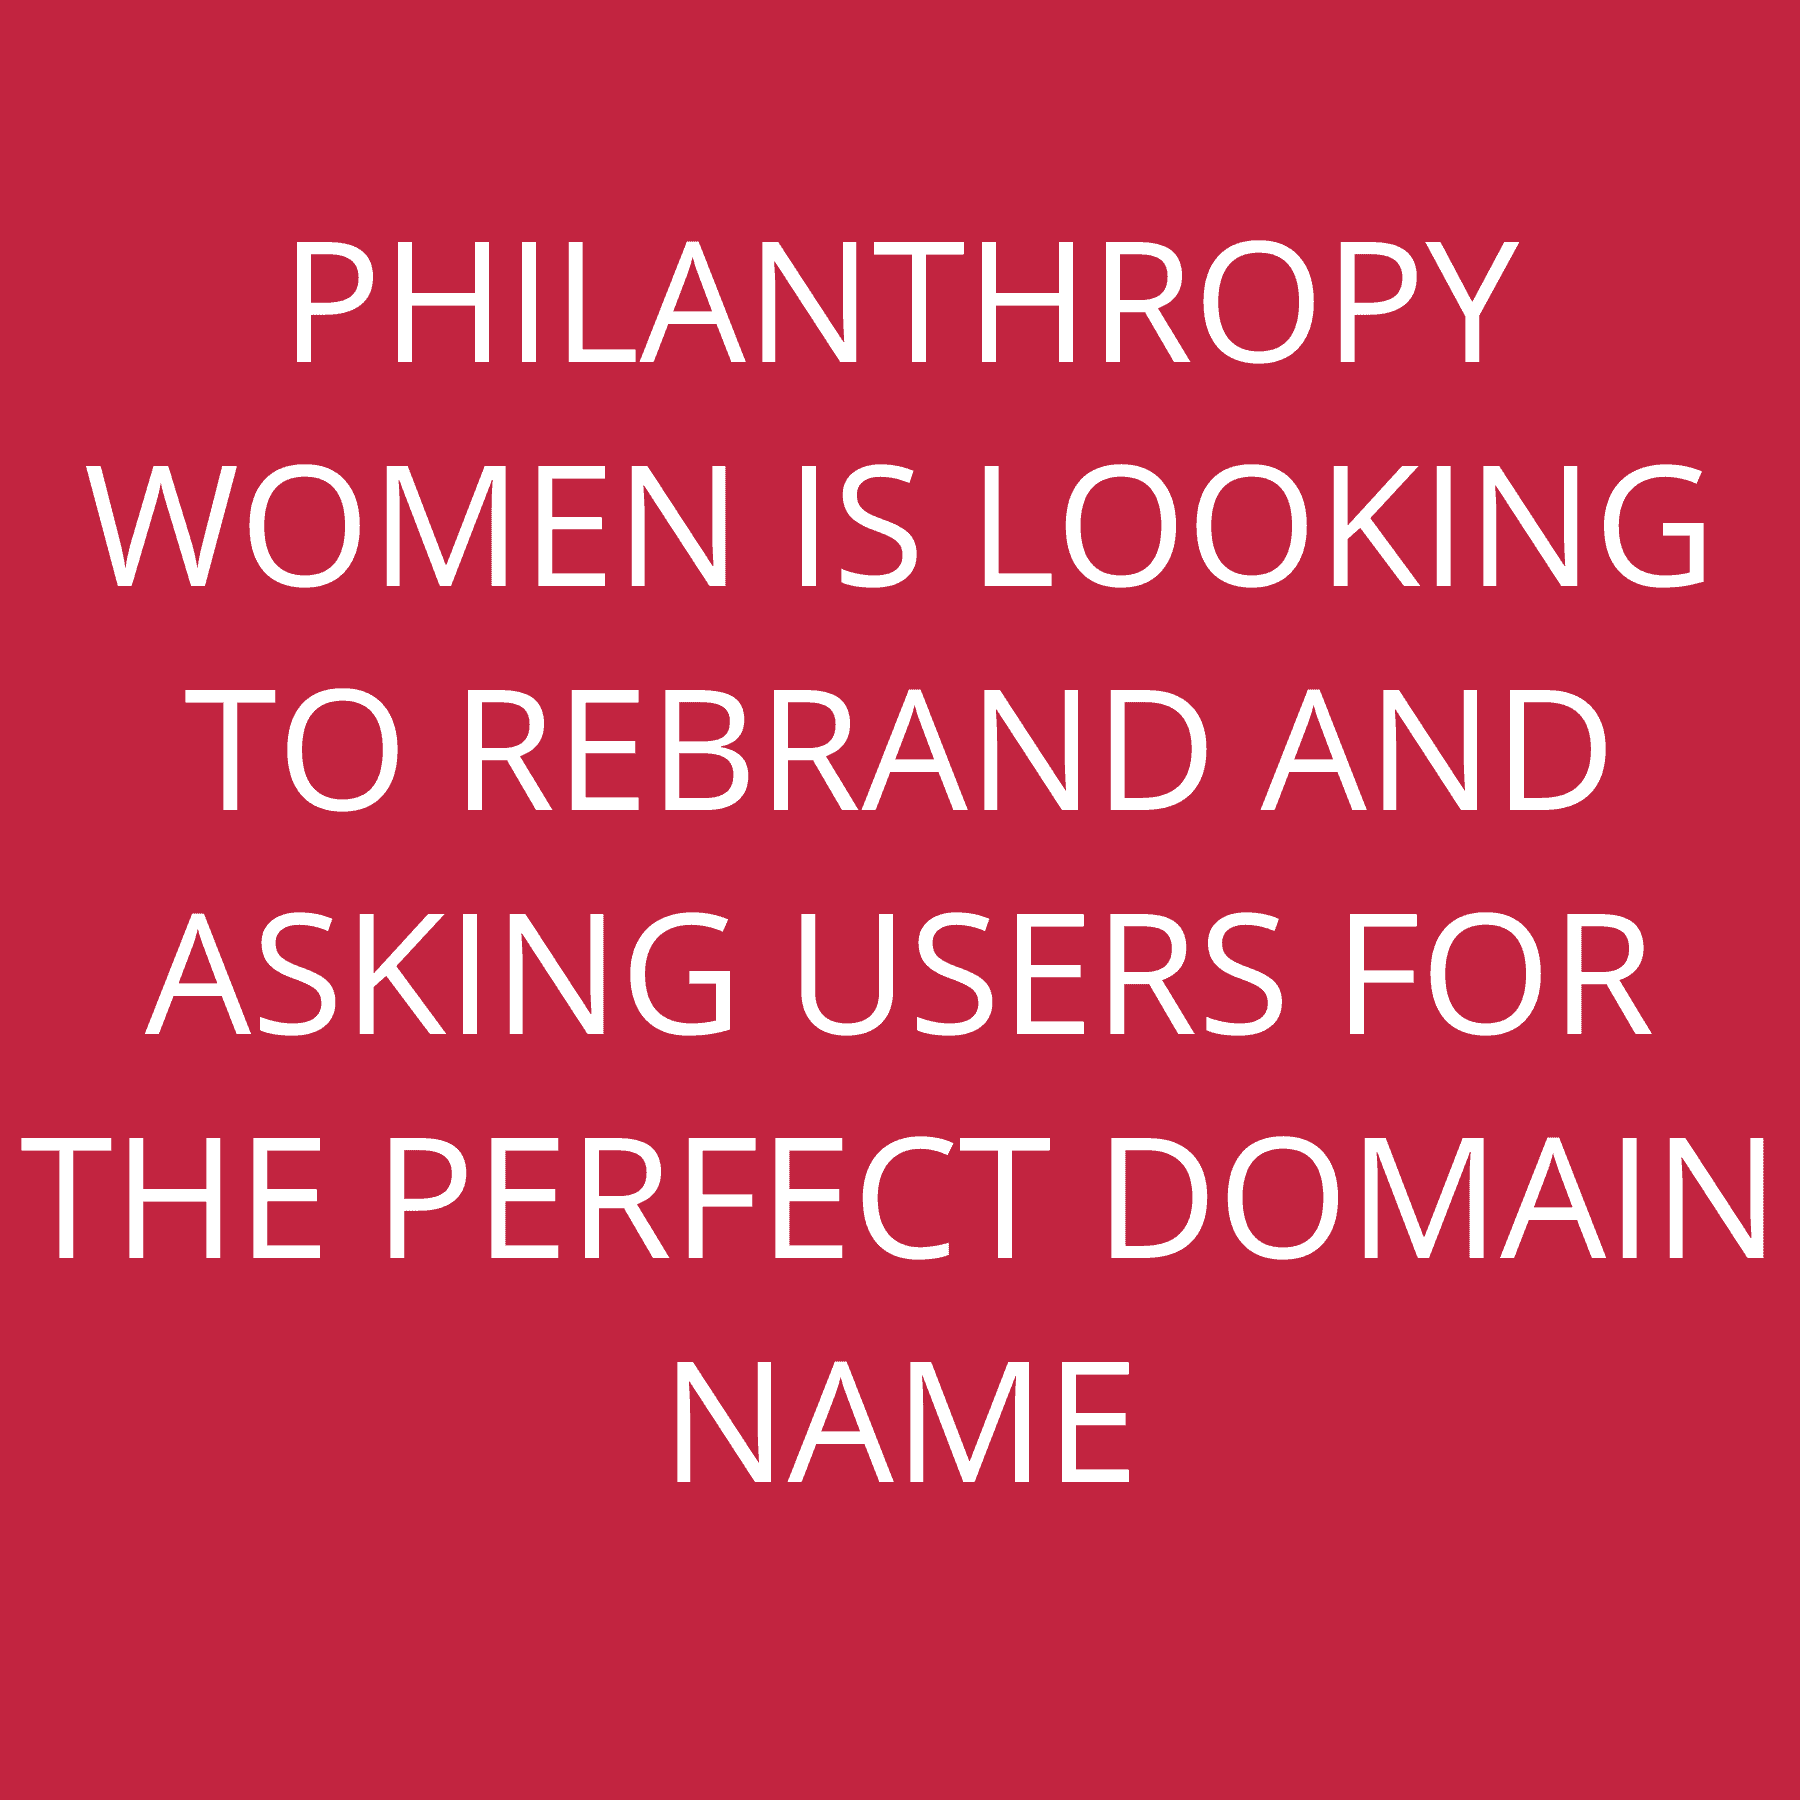 Philanthropy Women is looking to rebrand and asking users for the perfect Domain Name